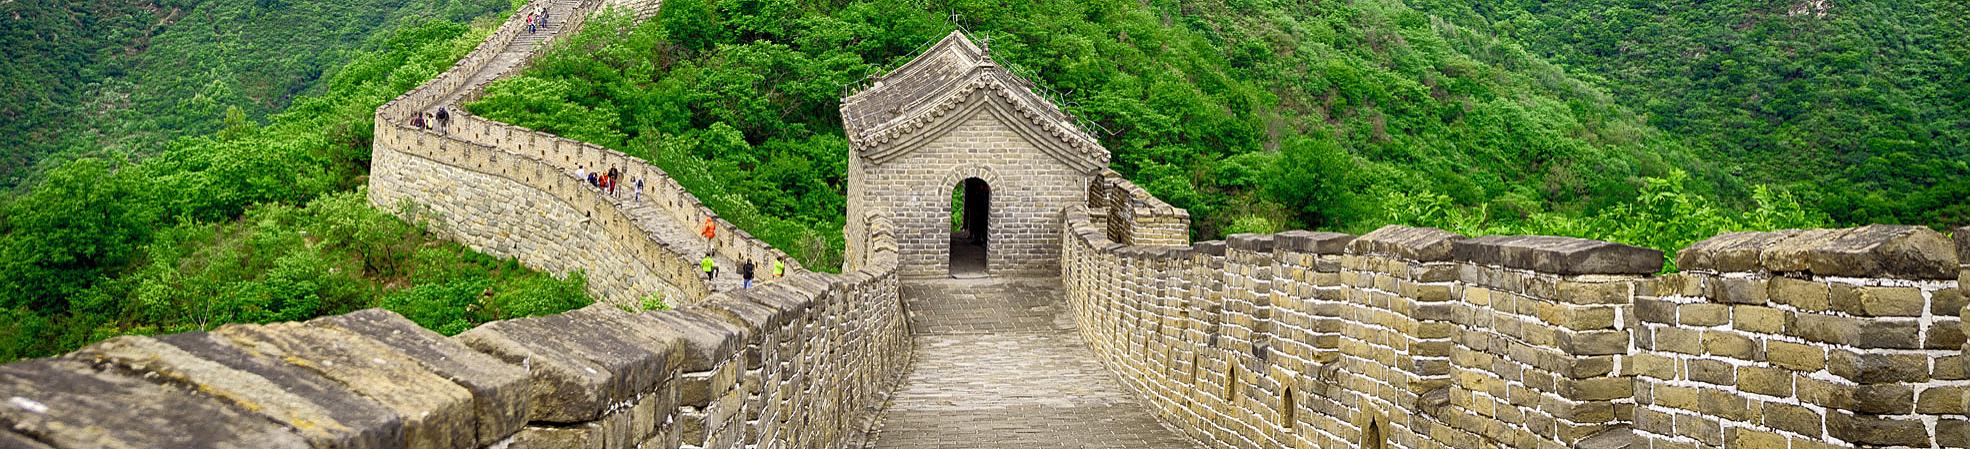 Best Time to Visit the Great Wall in Beijing, China